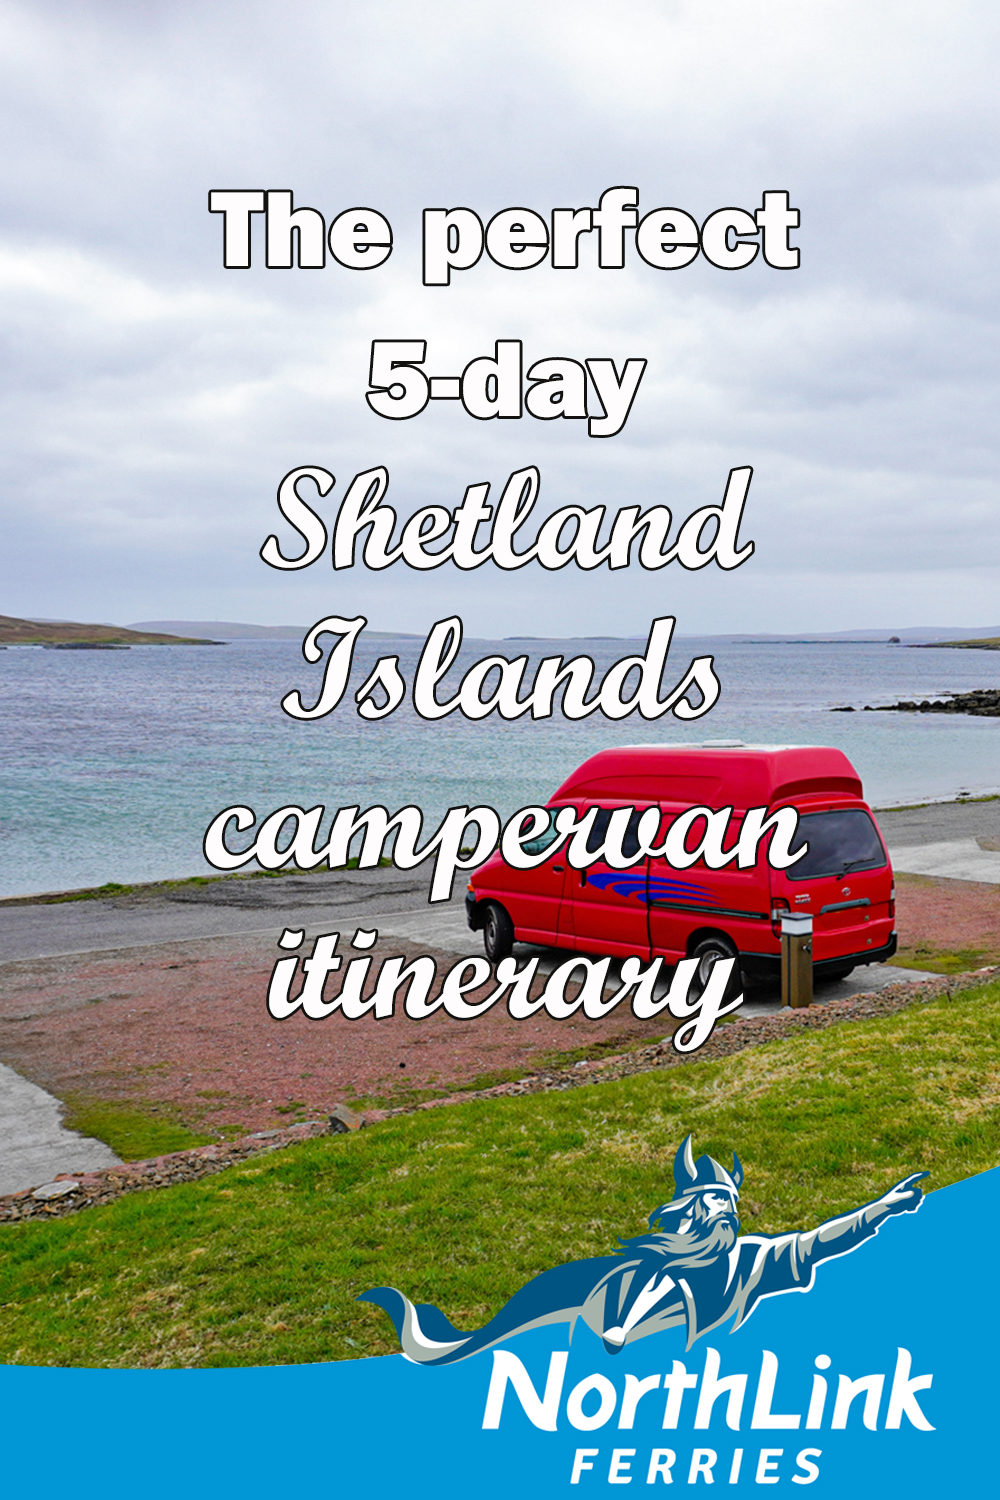 The perfect 5-day Shetland Islands campervan itinerary